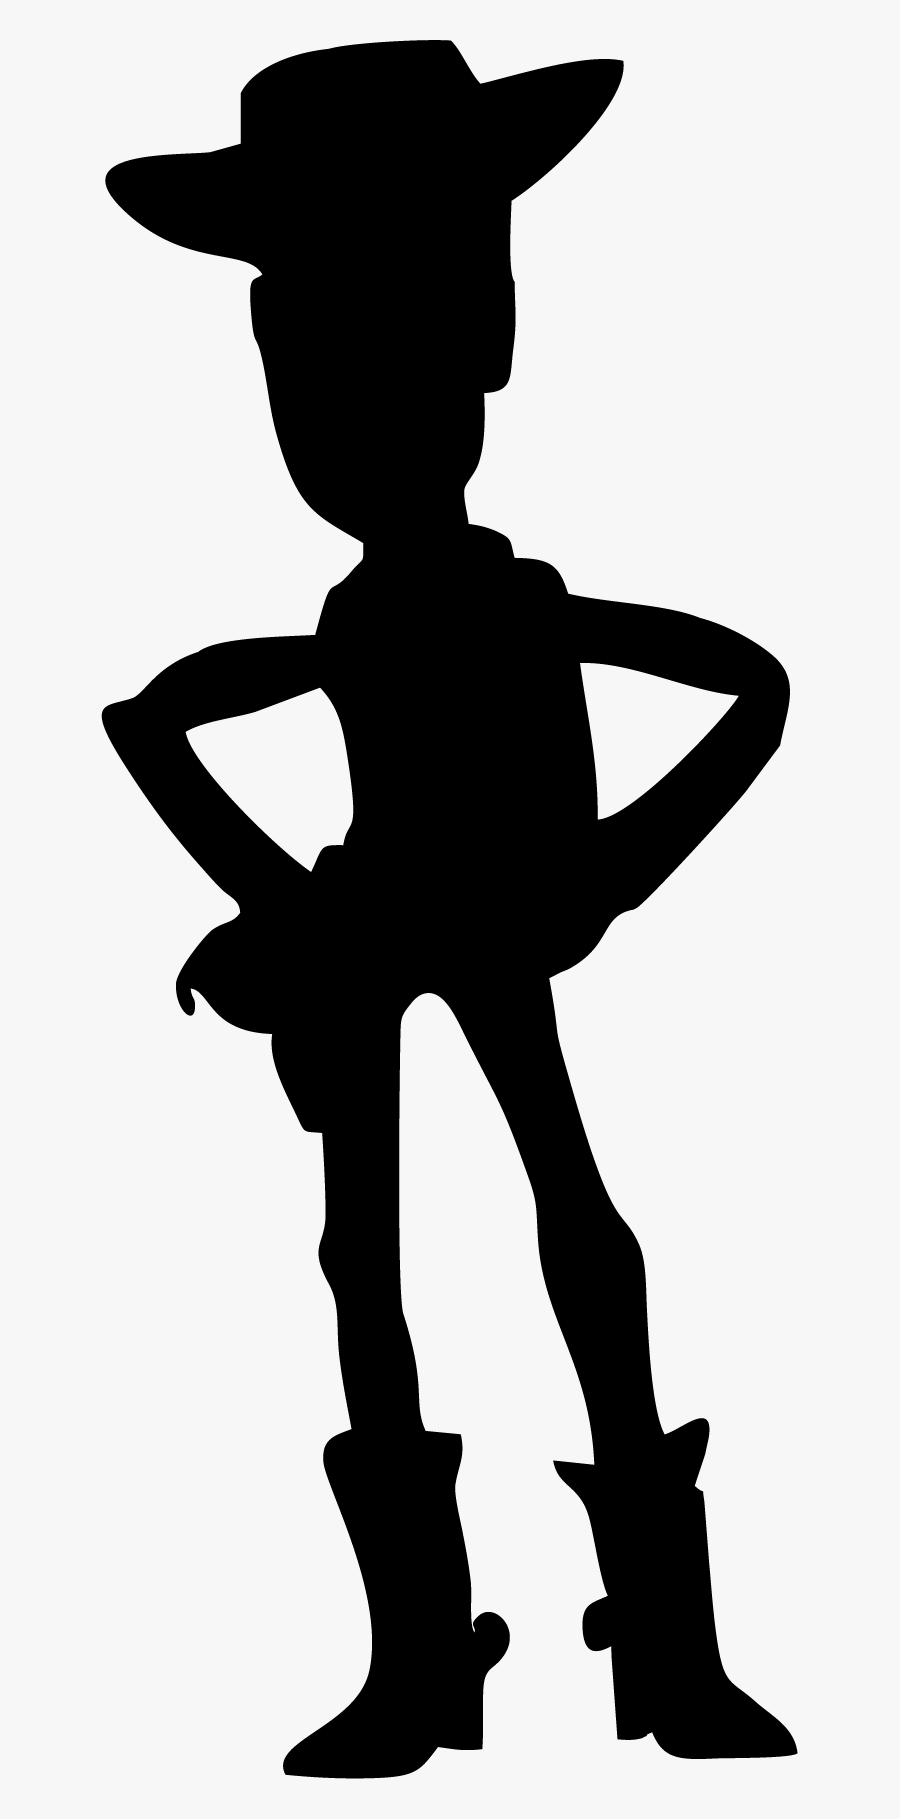 Download Woody Toy Story Svg Transparent Cartoons Woody Toy Story Silhouette Free Transparent Clipart Clipartkey